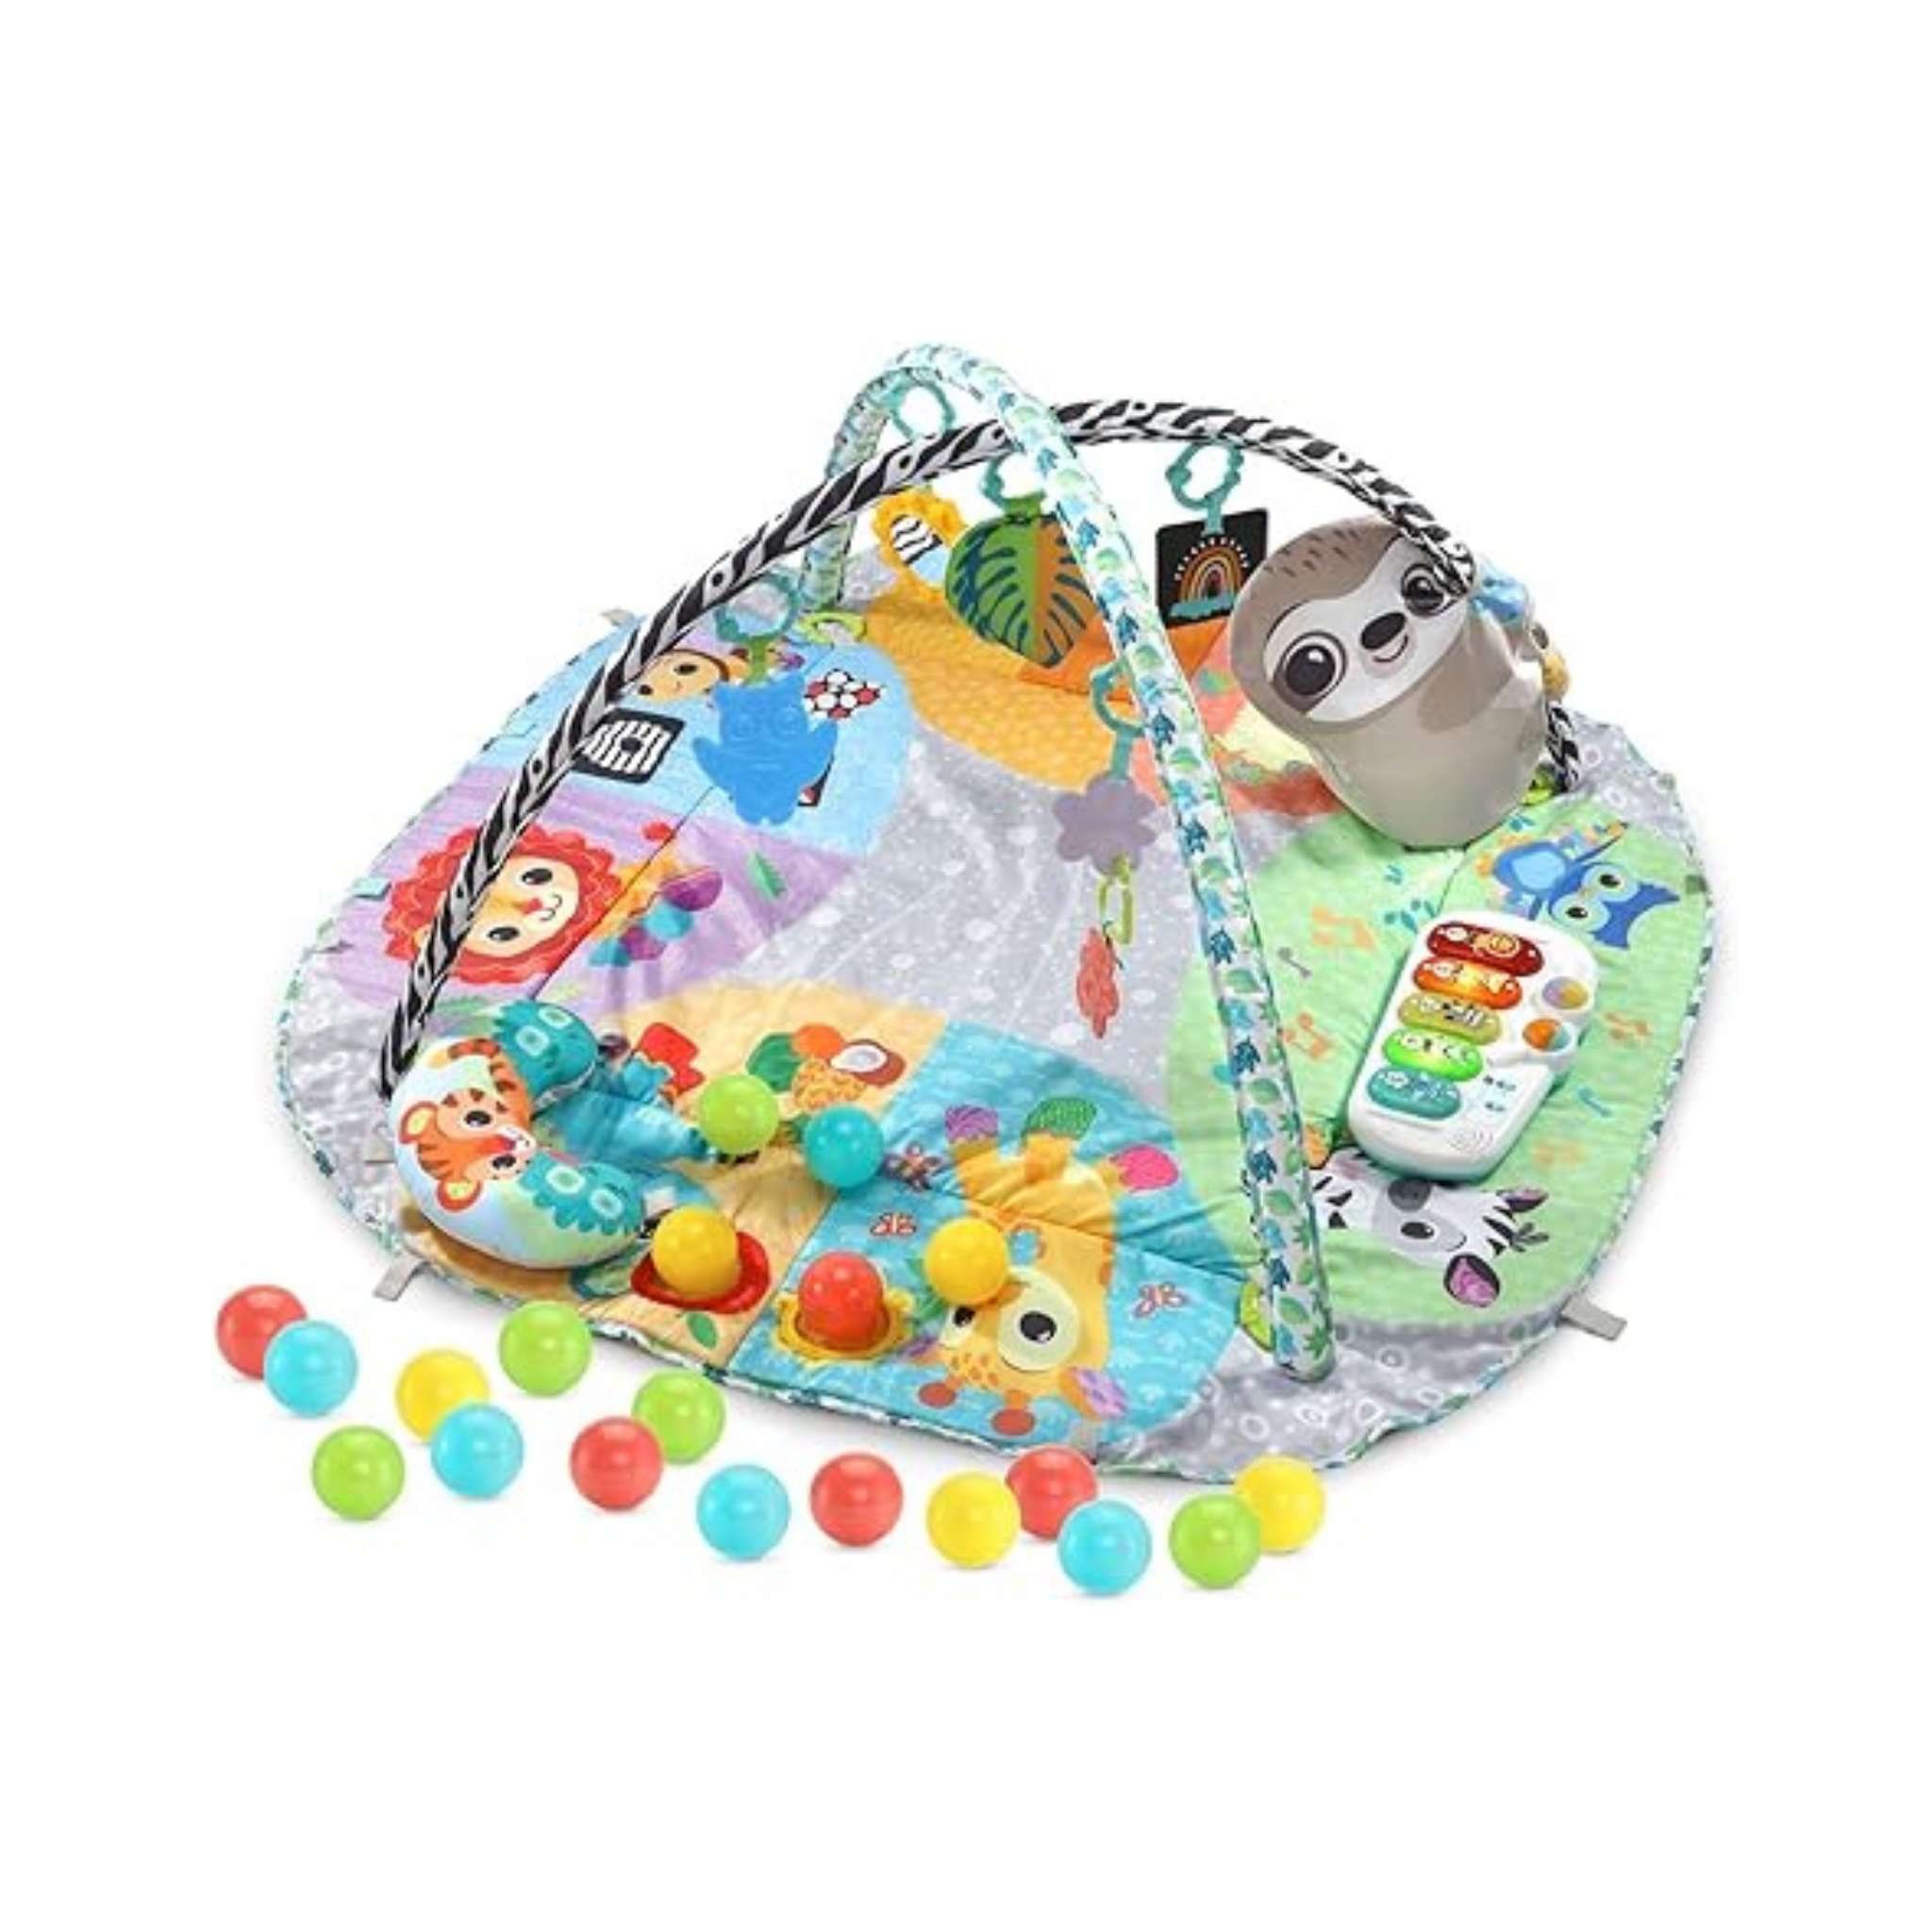 VTech 7-in-1 Senses and Stages Developmental Gym